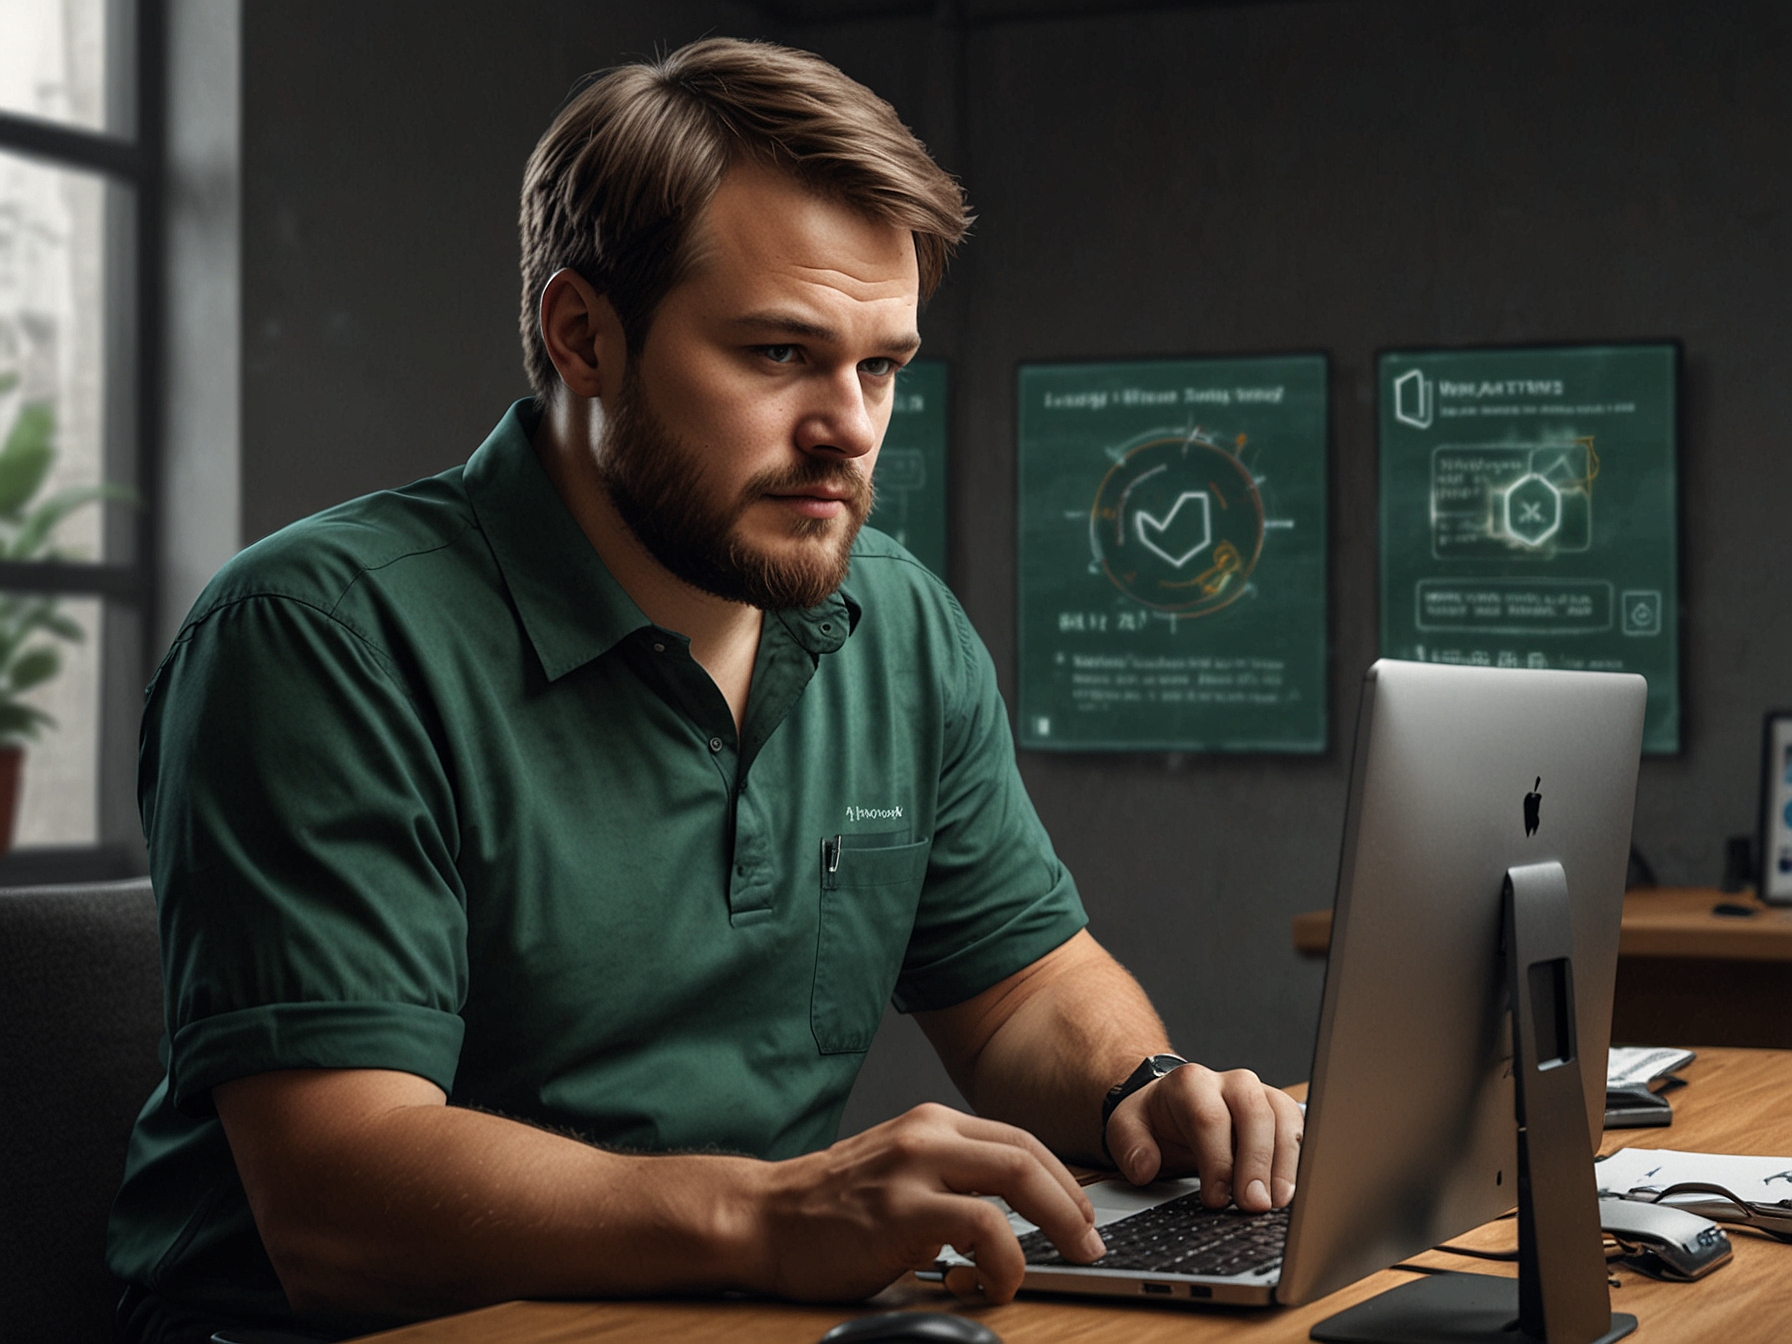 Image of a user receiving a notification about Kaspersky antivirus software being banned, highlighting the immediate impact on existing users and the need for software transition.